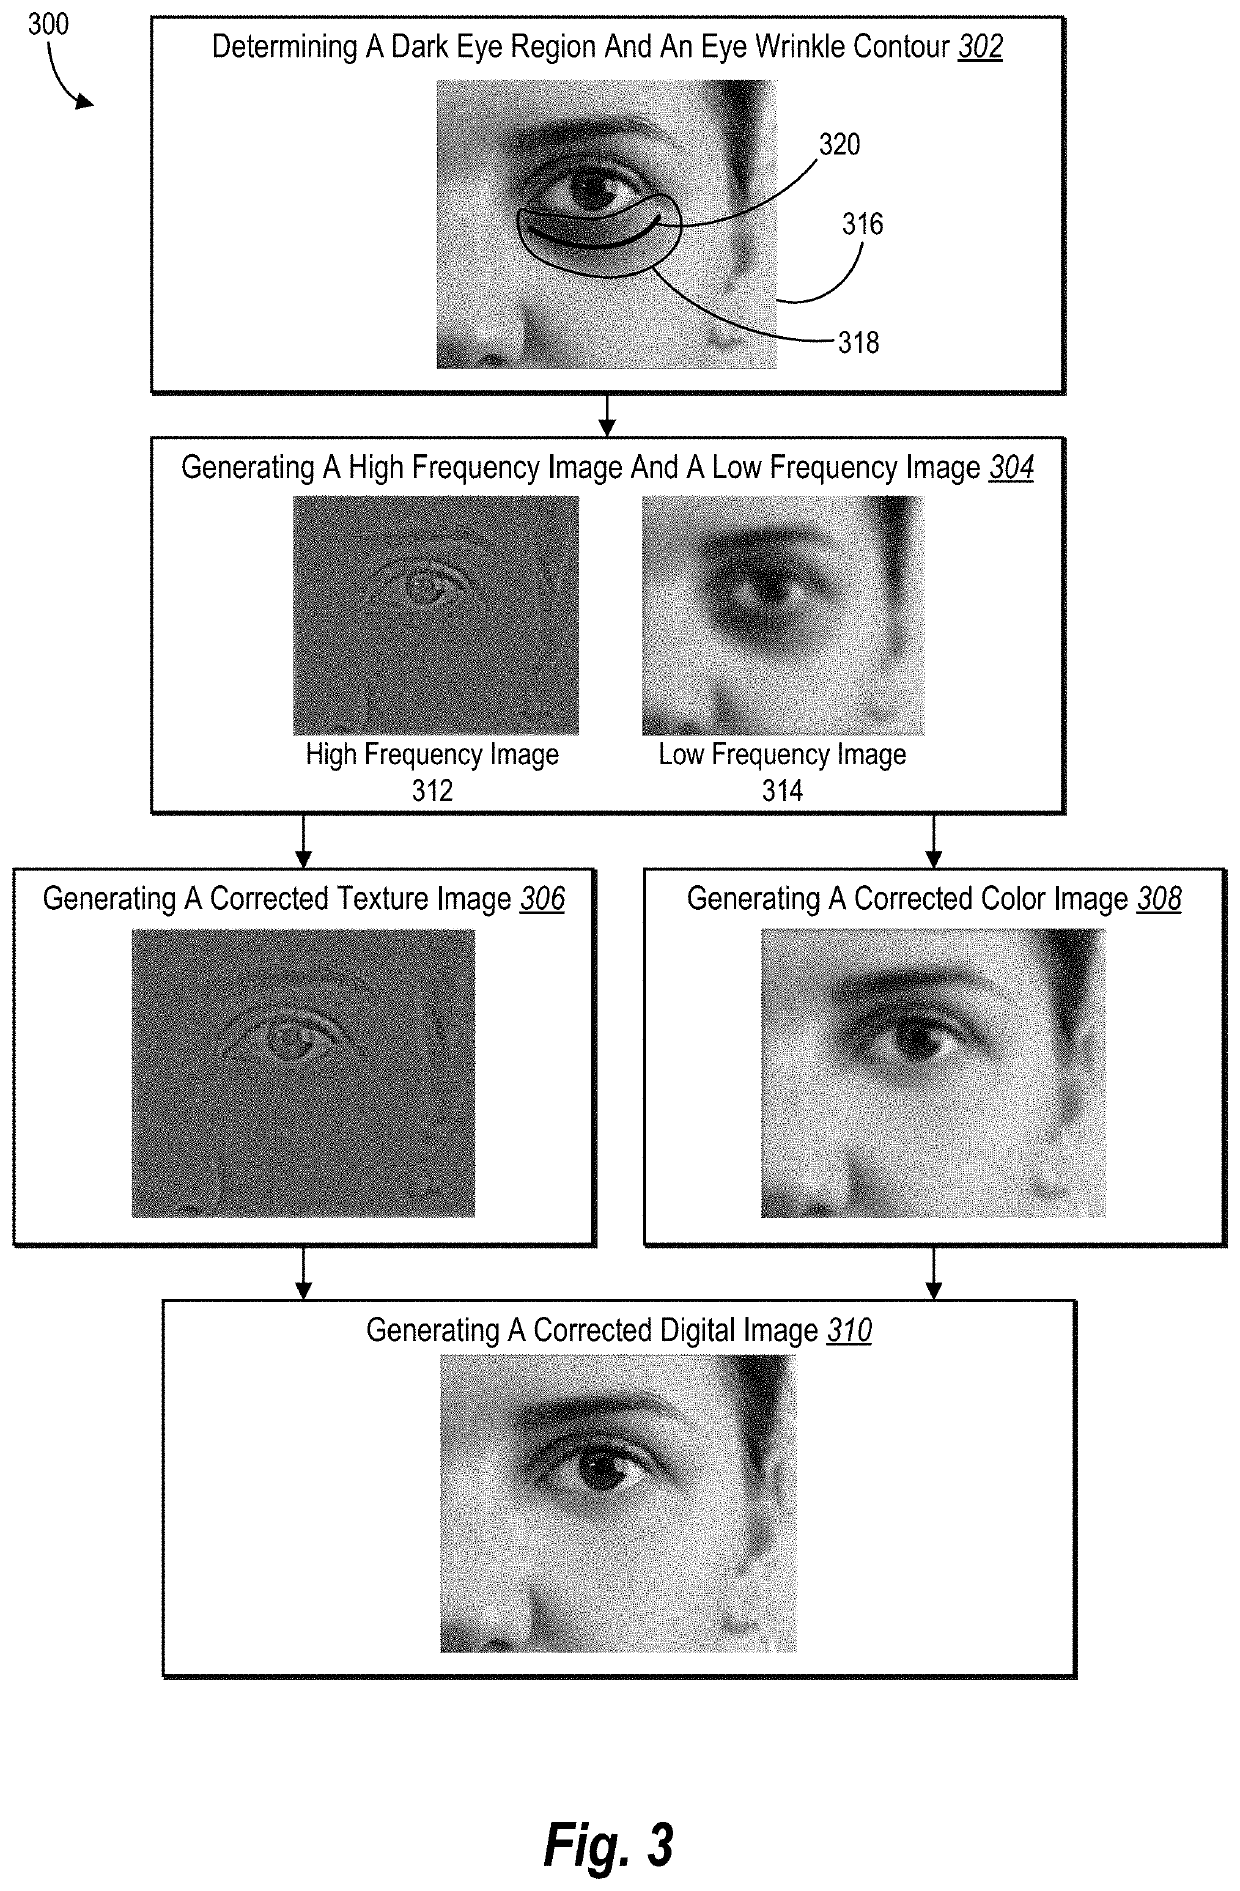 Automatically correcting eye region artifacts in digital images portraying faces